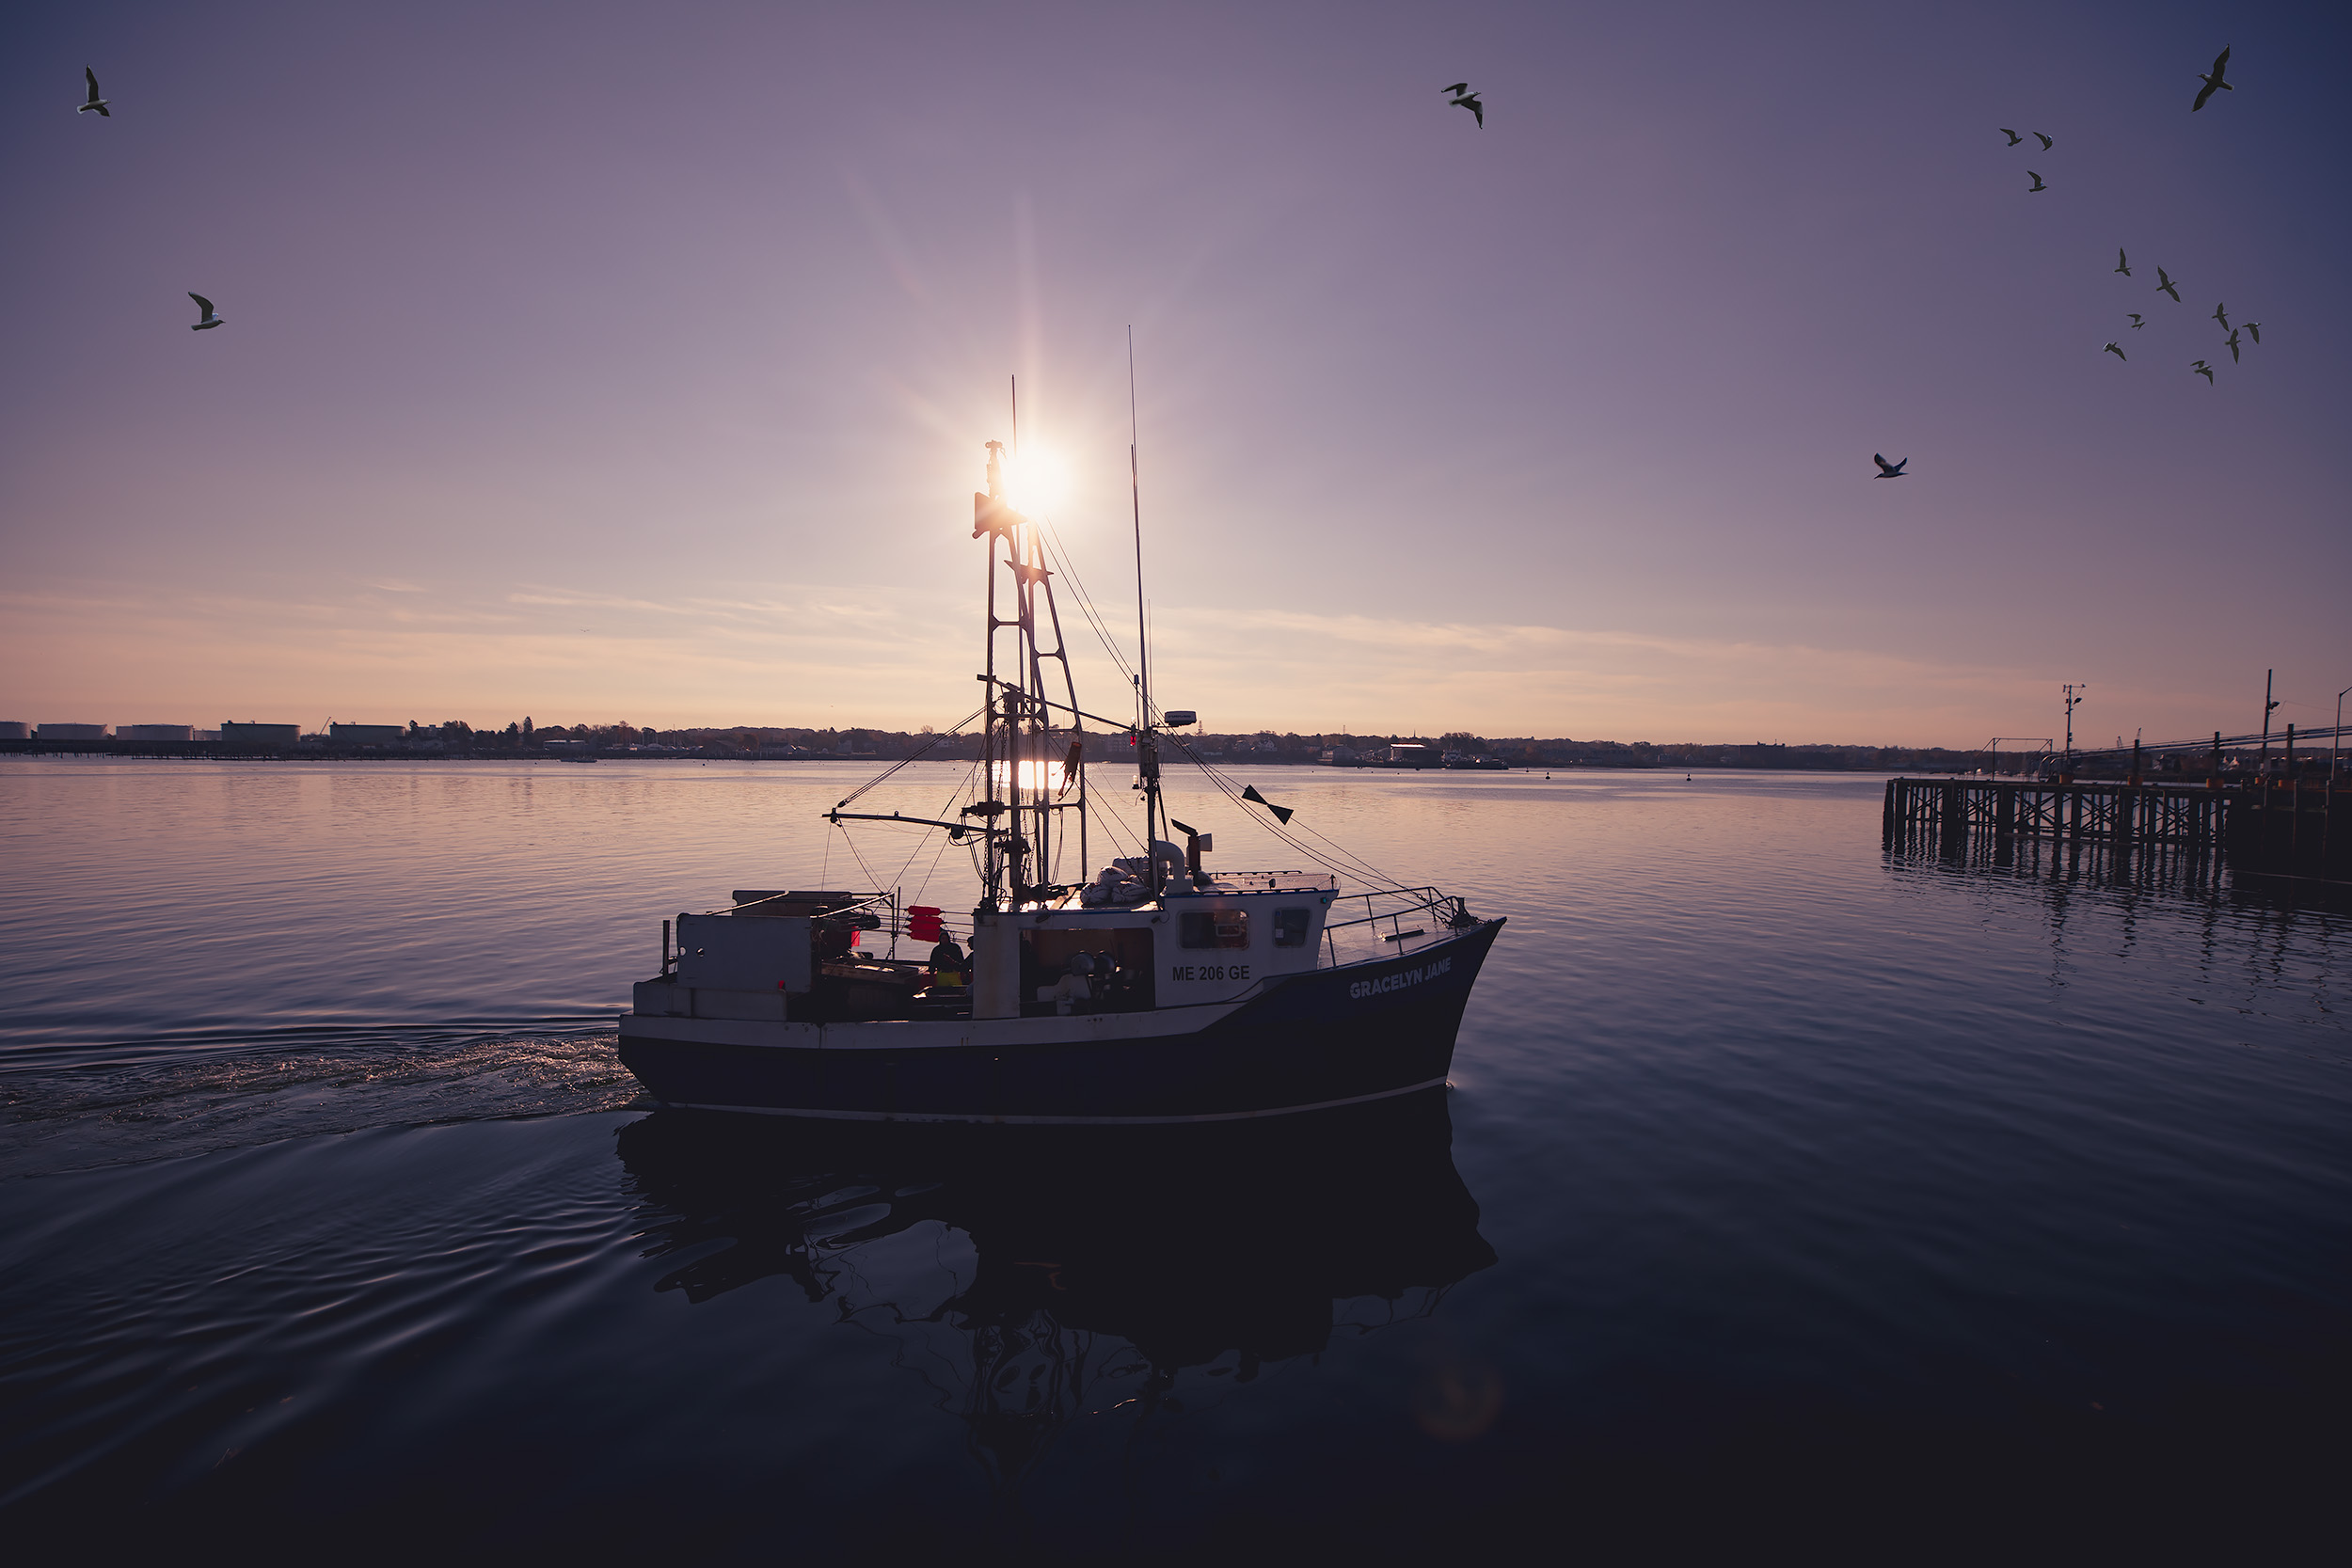 COMMERCIAL FISHING BOAT MAINE SCOTT GABLE COMMERCIAL SCI TECH INDUSTRIAL PHOTOGRAPHER